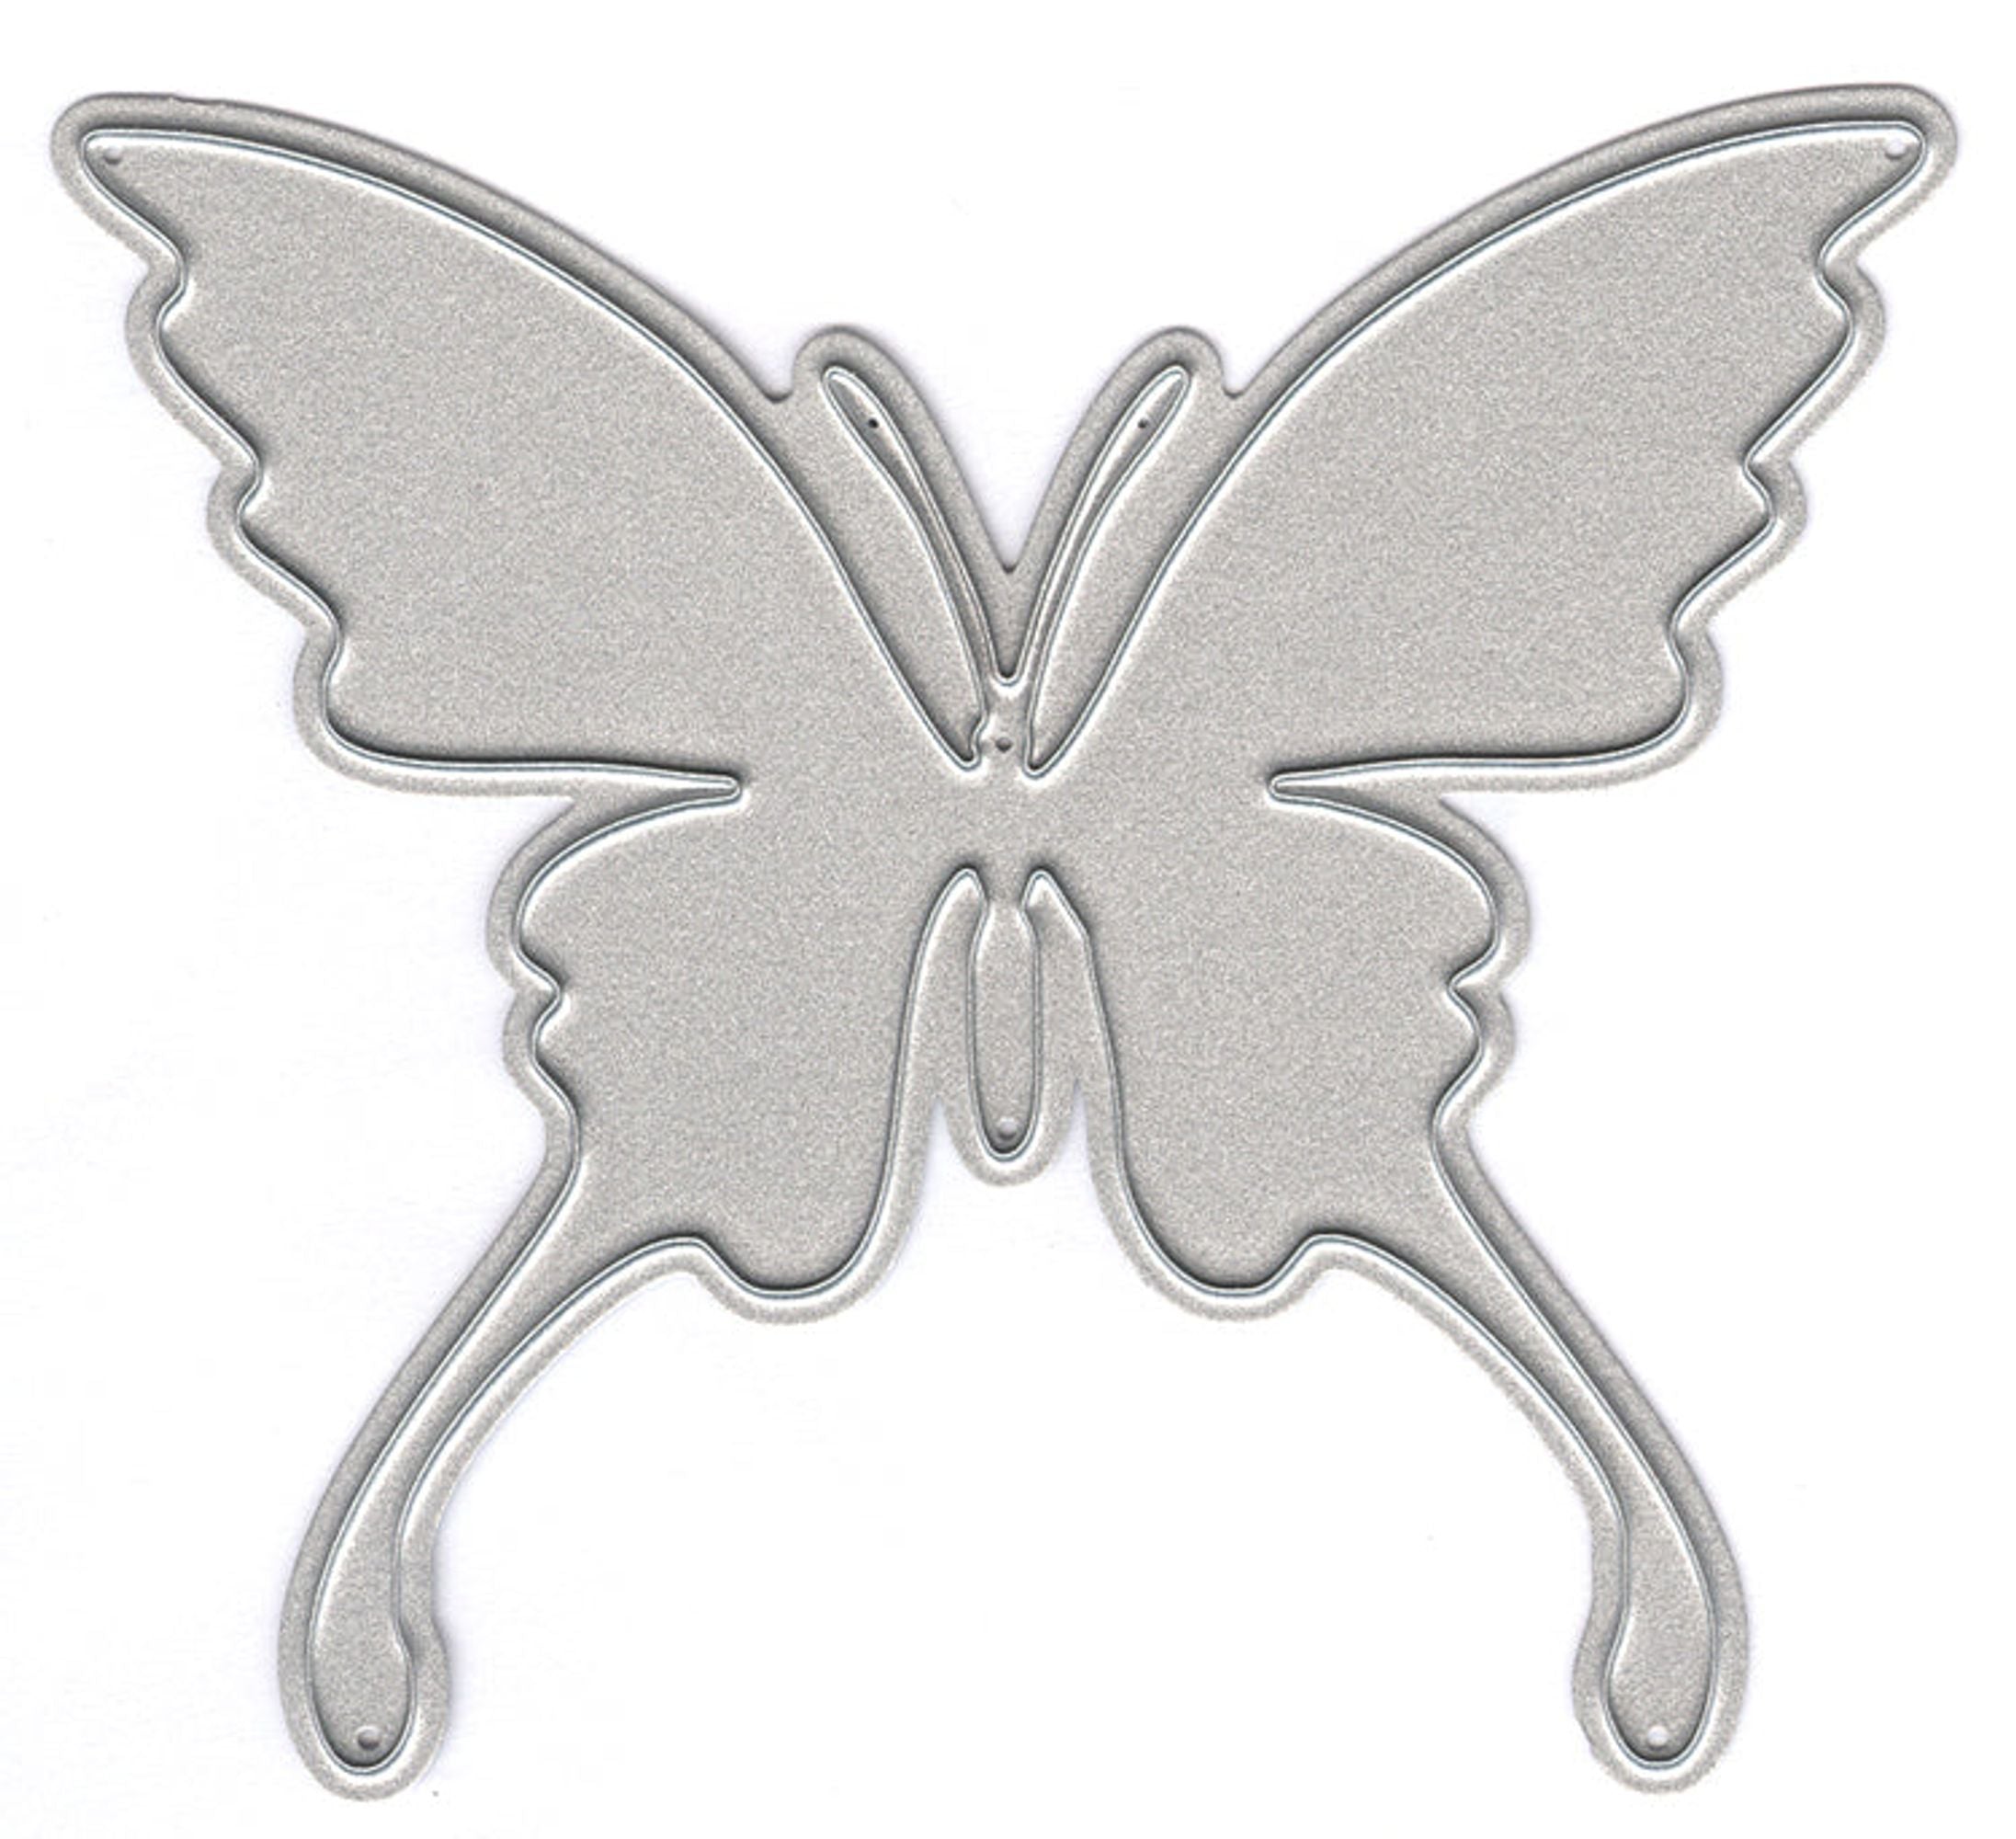 Nellie's Choice - Hobby Solutions Die Cut "Butterfly-1"